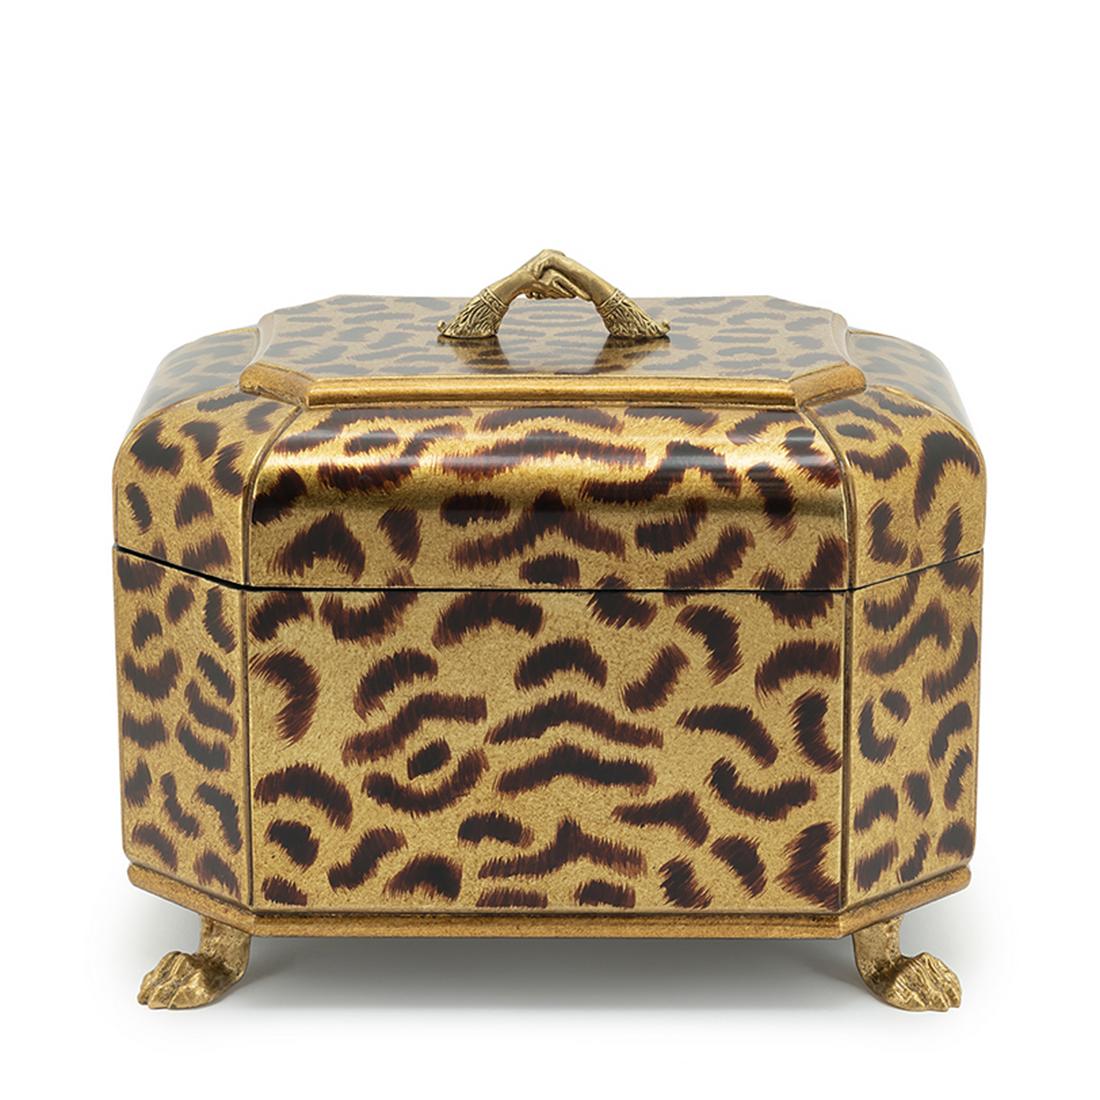 Box Leo Kenza all in solid wood with tawny
pattern finish outside. With black lacquered
finish inside, box with opening lid. With brass
deco on the top and brass feet.